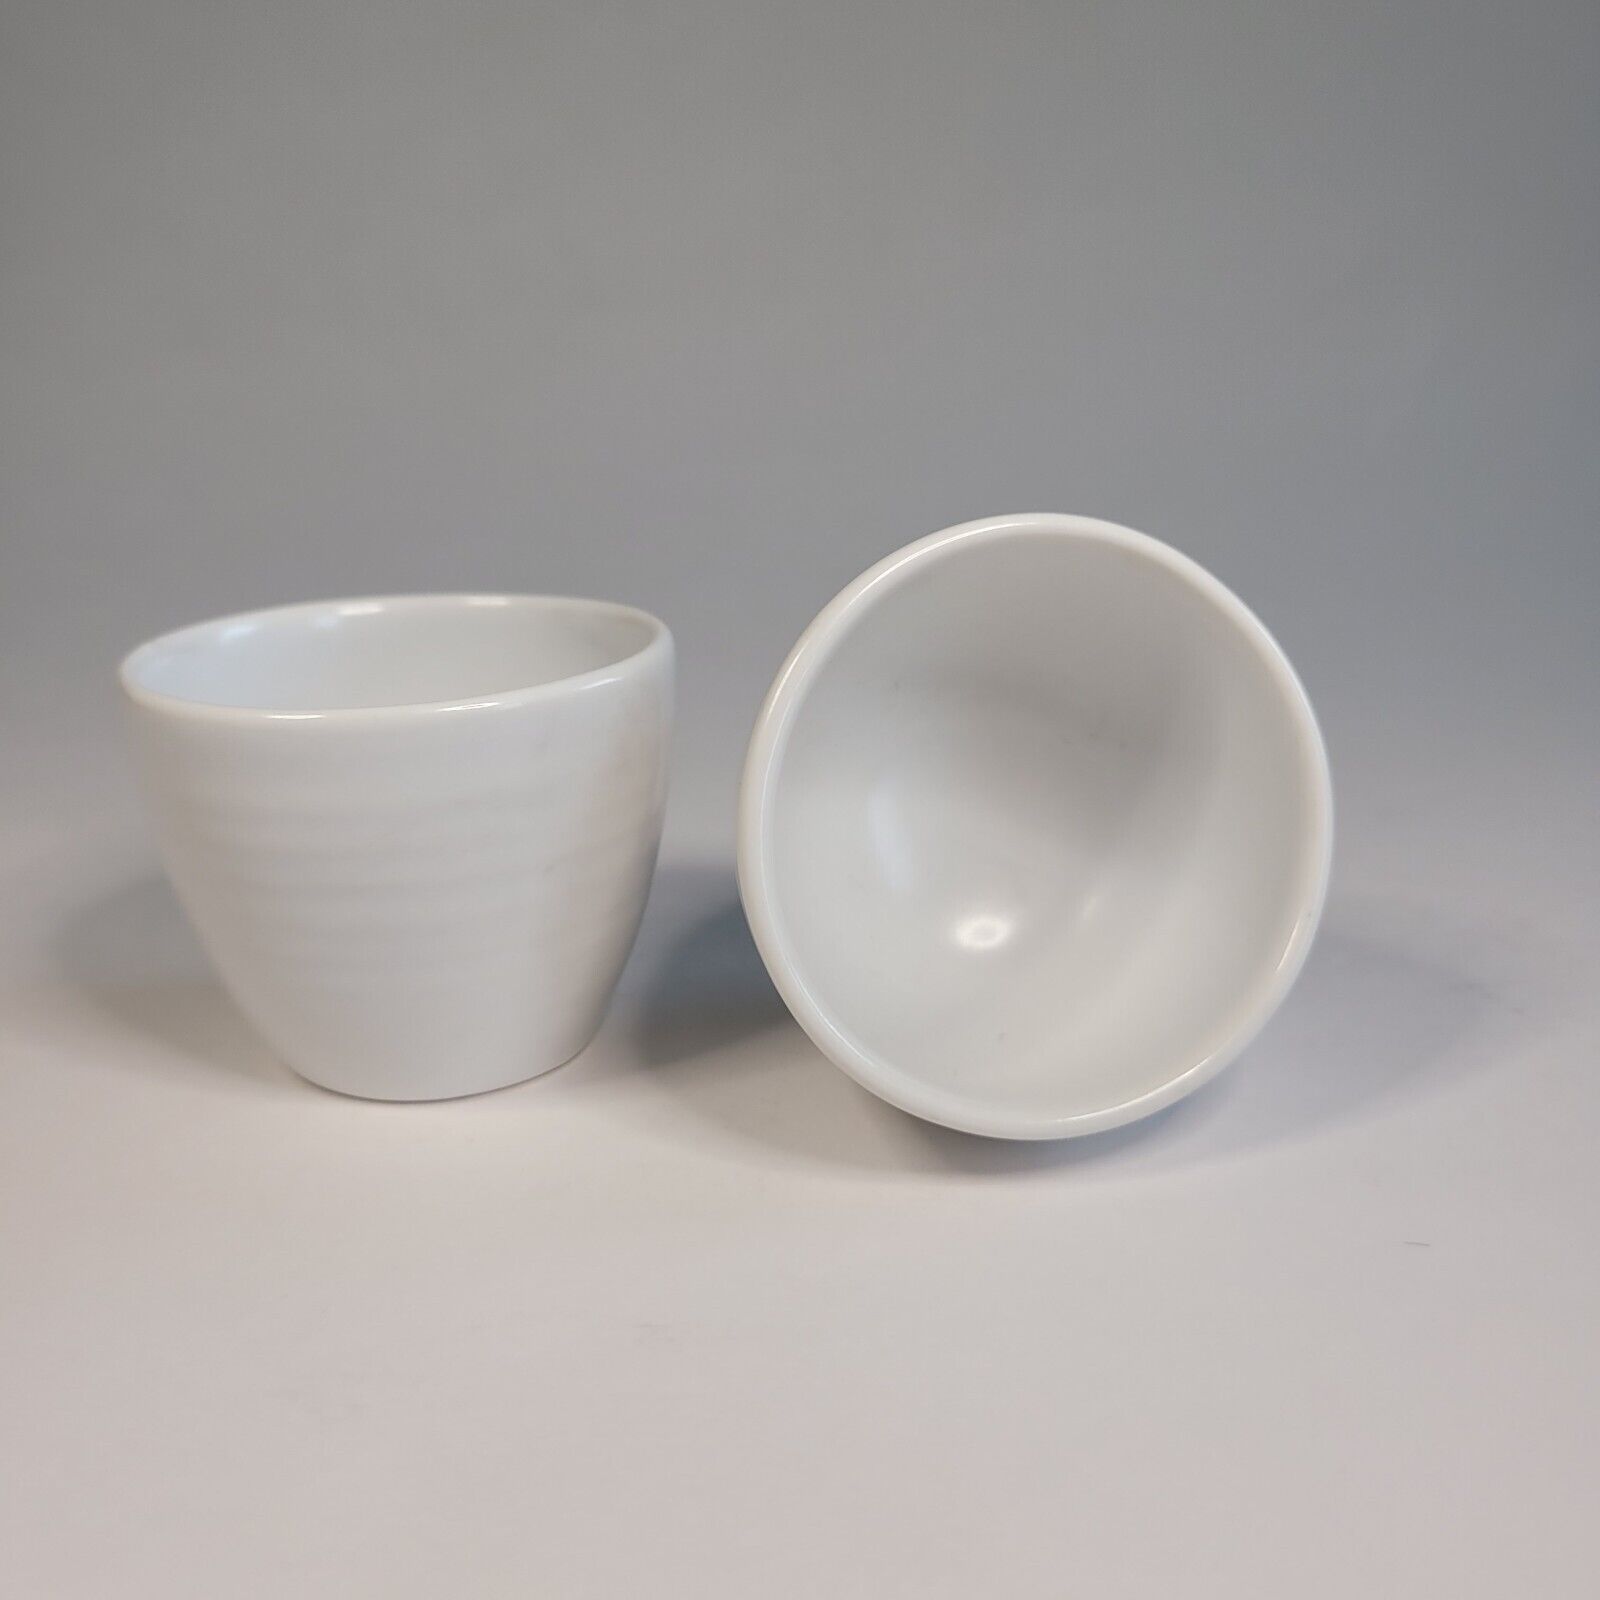 Two Egg Cups, Vintage White, , 1.5 inches tall, VTG, MCM, sake cup